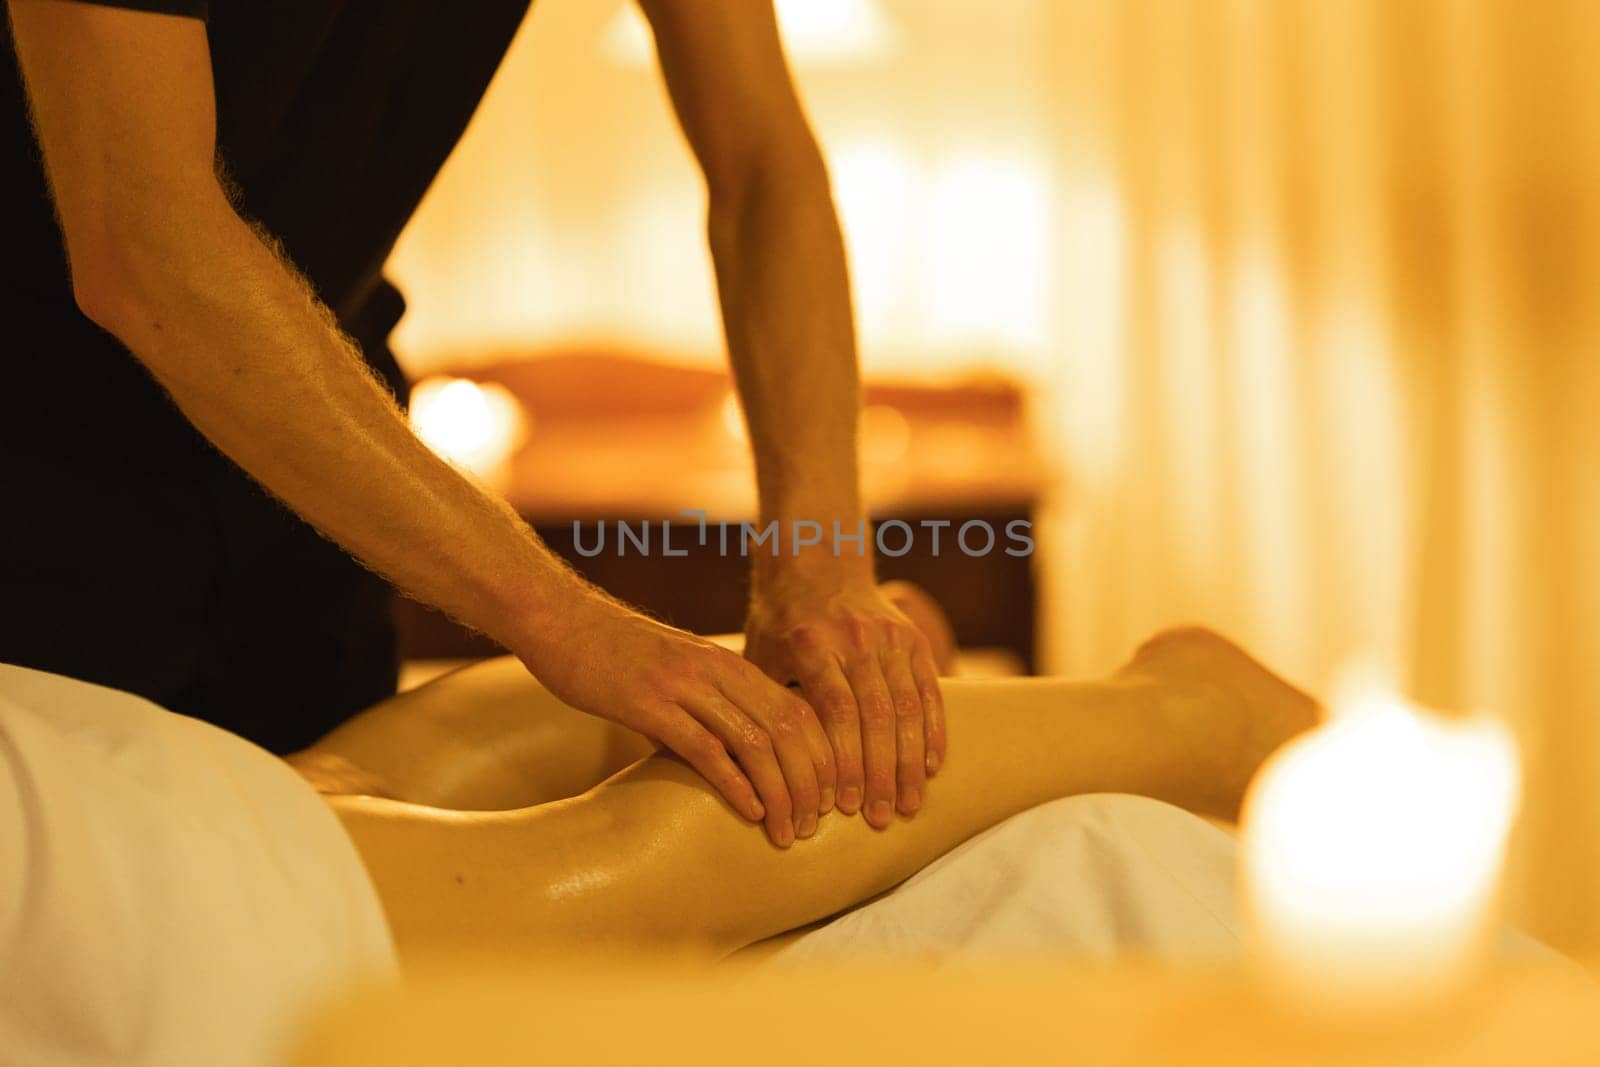 Massage in spa salon - a man massages the shin of a woman client by Studia72